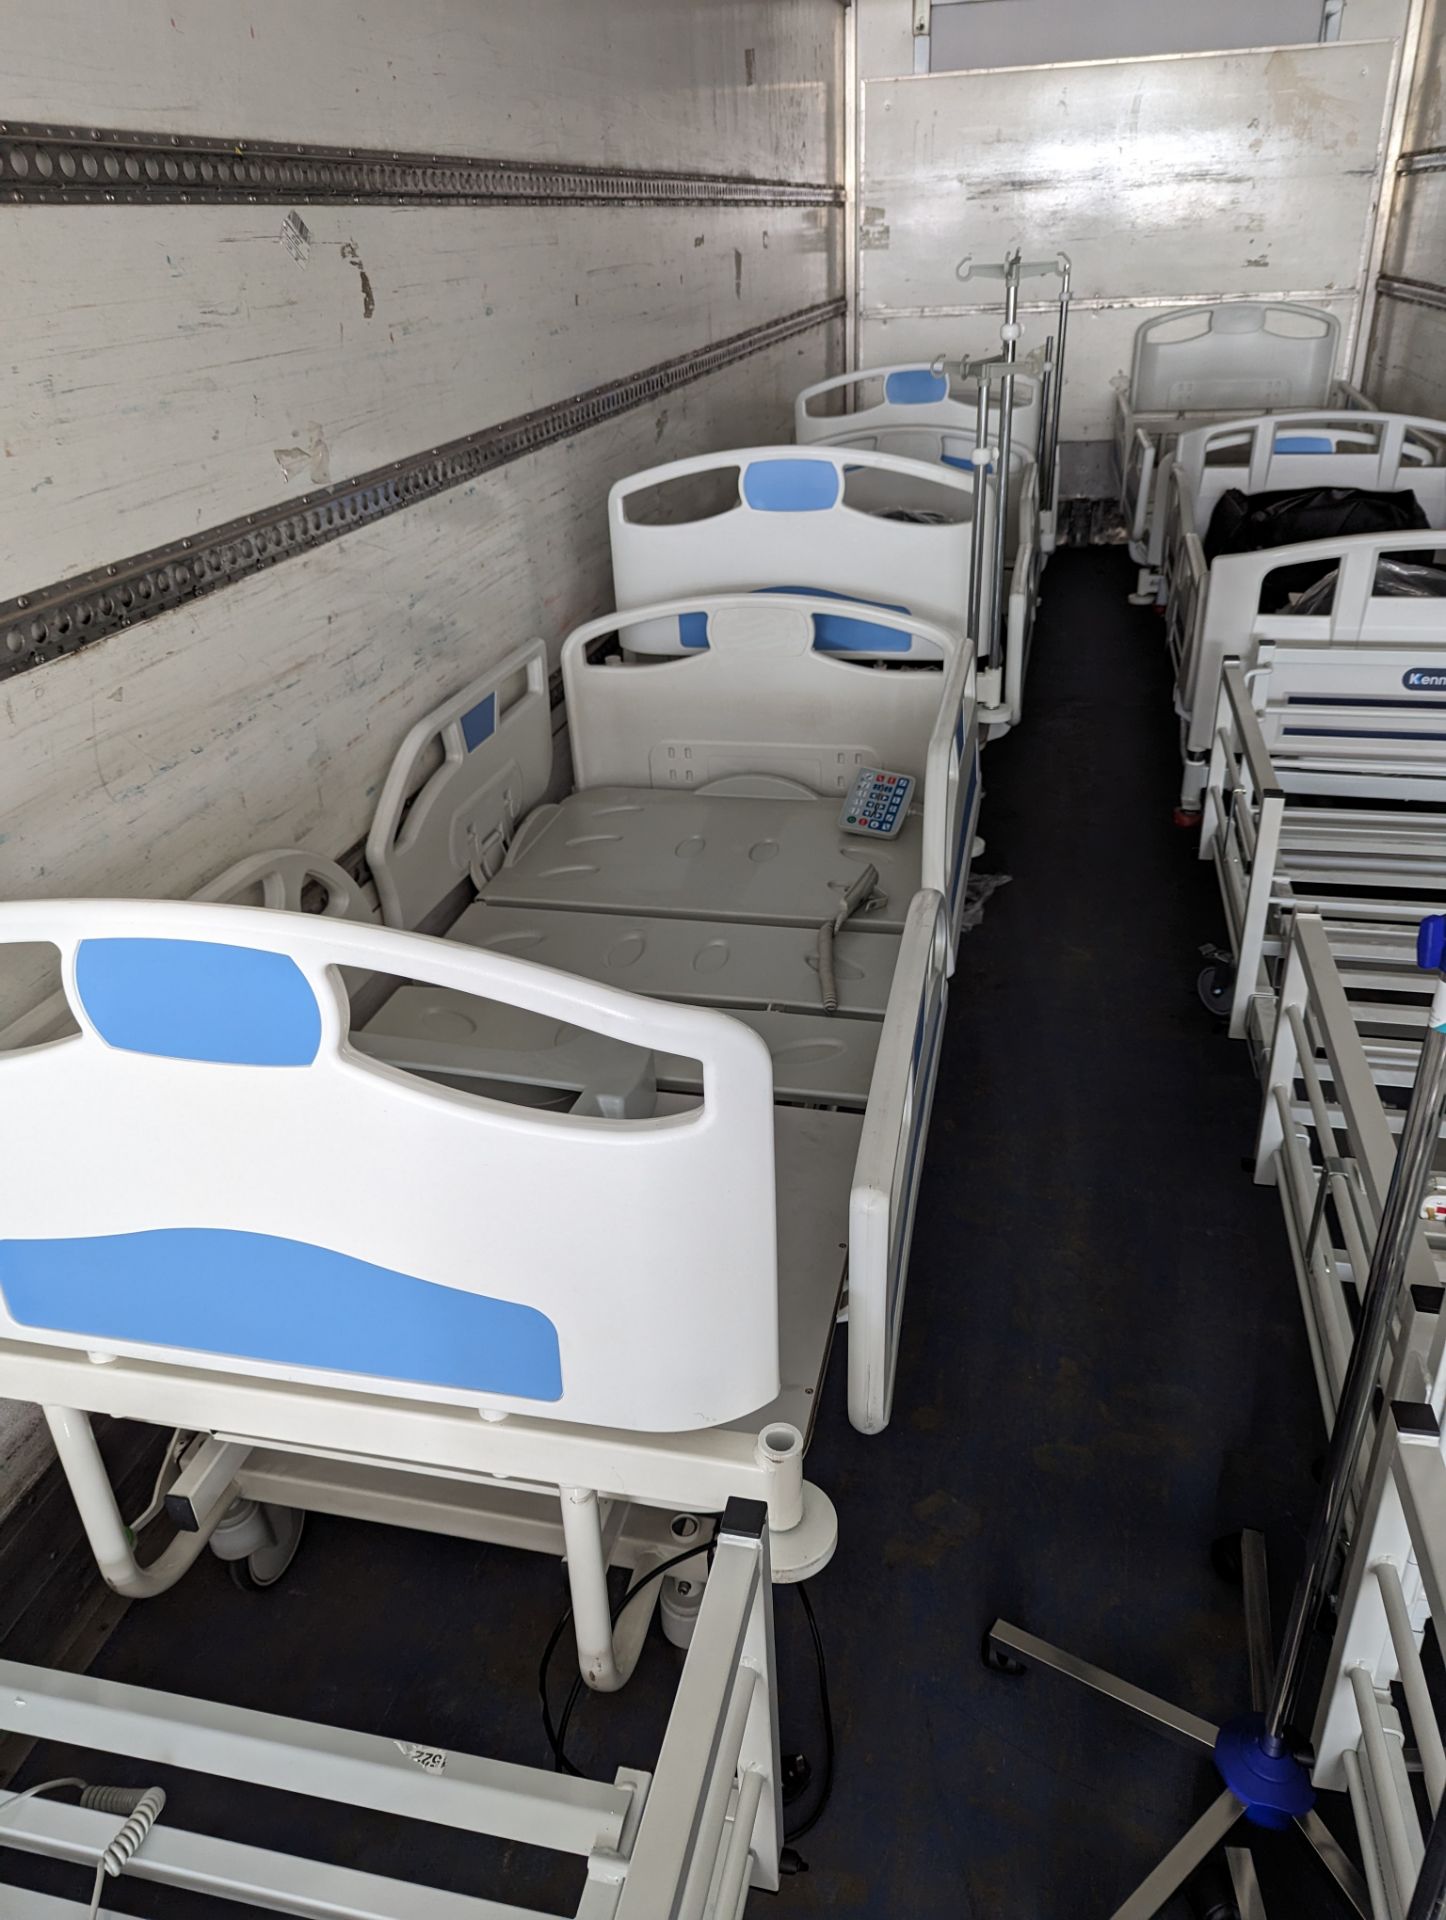 5 X KENMARK GUESS 301 ELECTRIC FULLY ADJUSTABLE HOSPITAL BEDS WITH MATTRESSES - Image 2 of 4